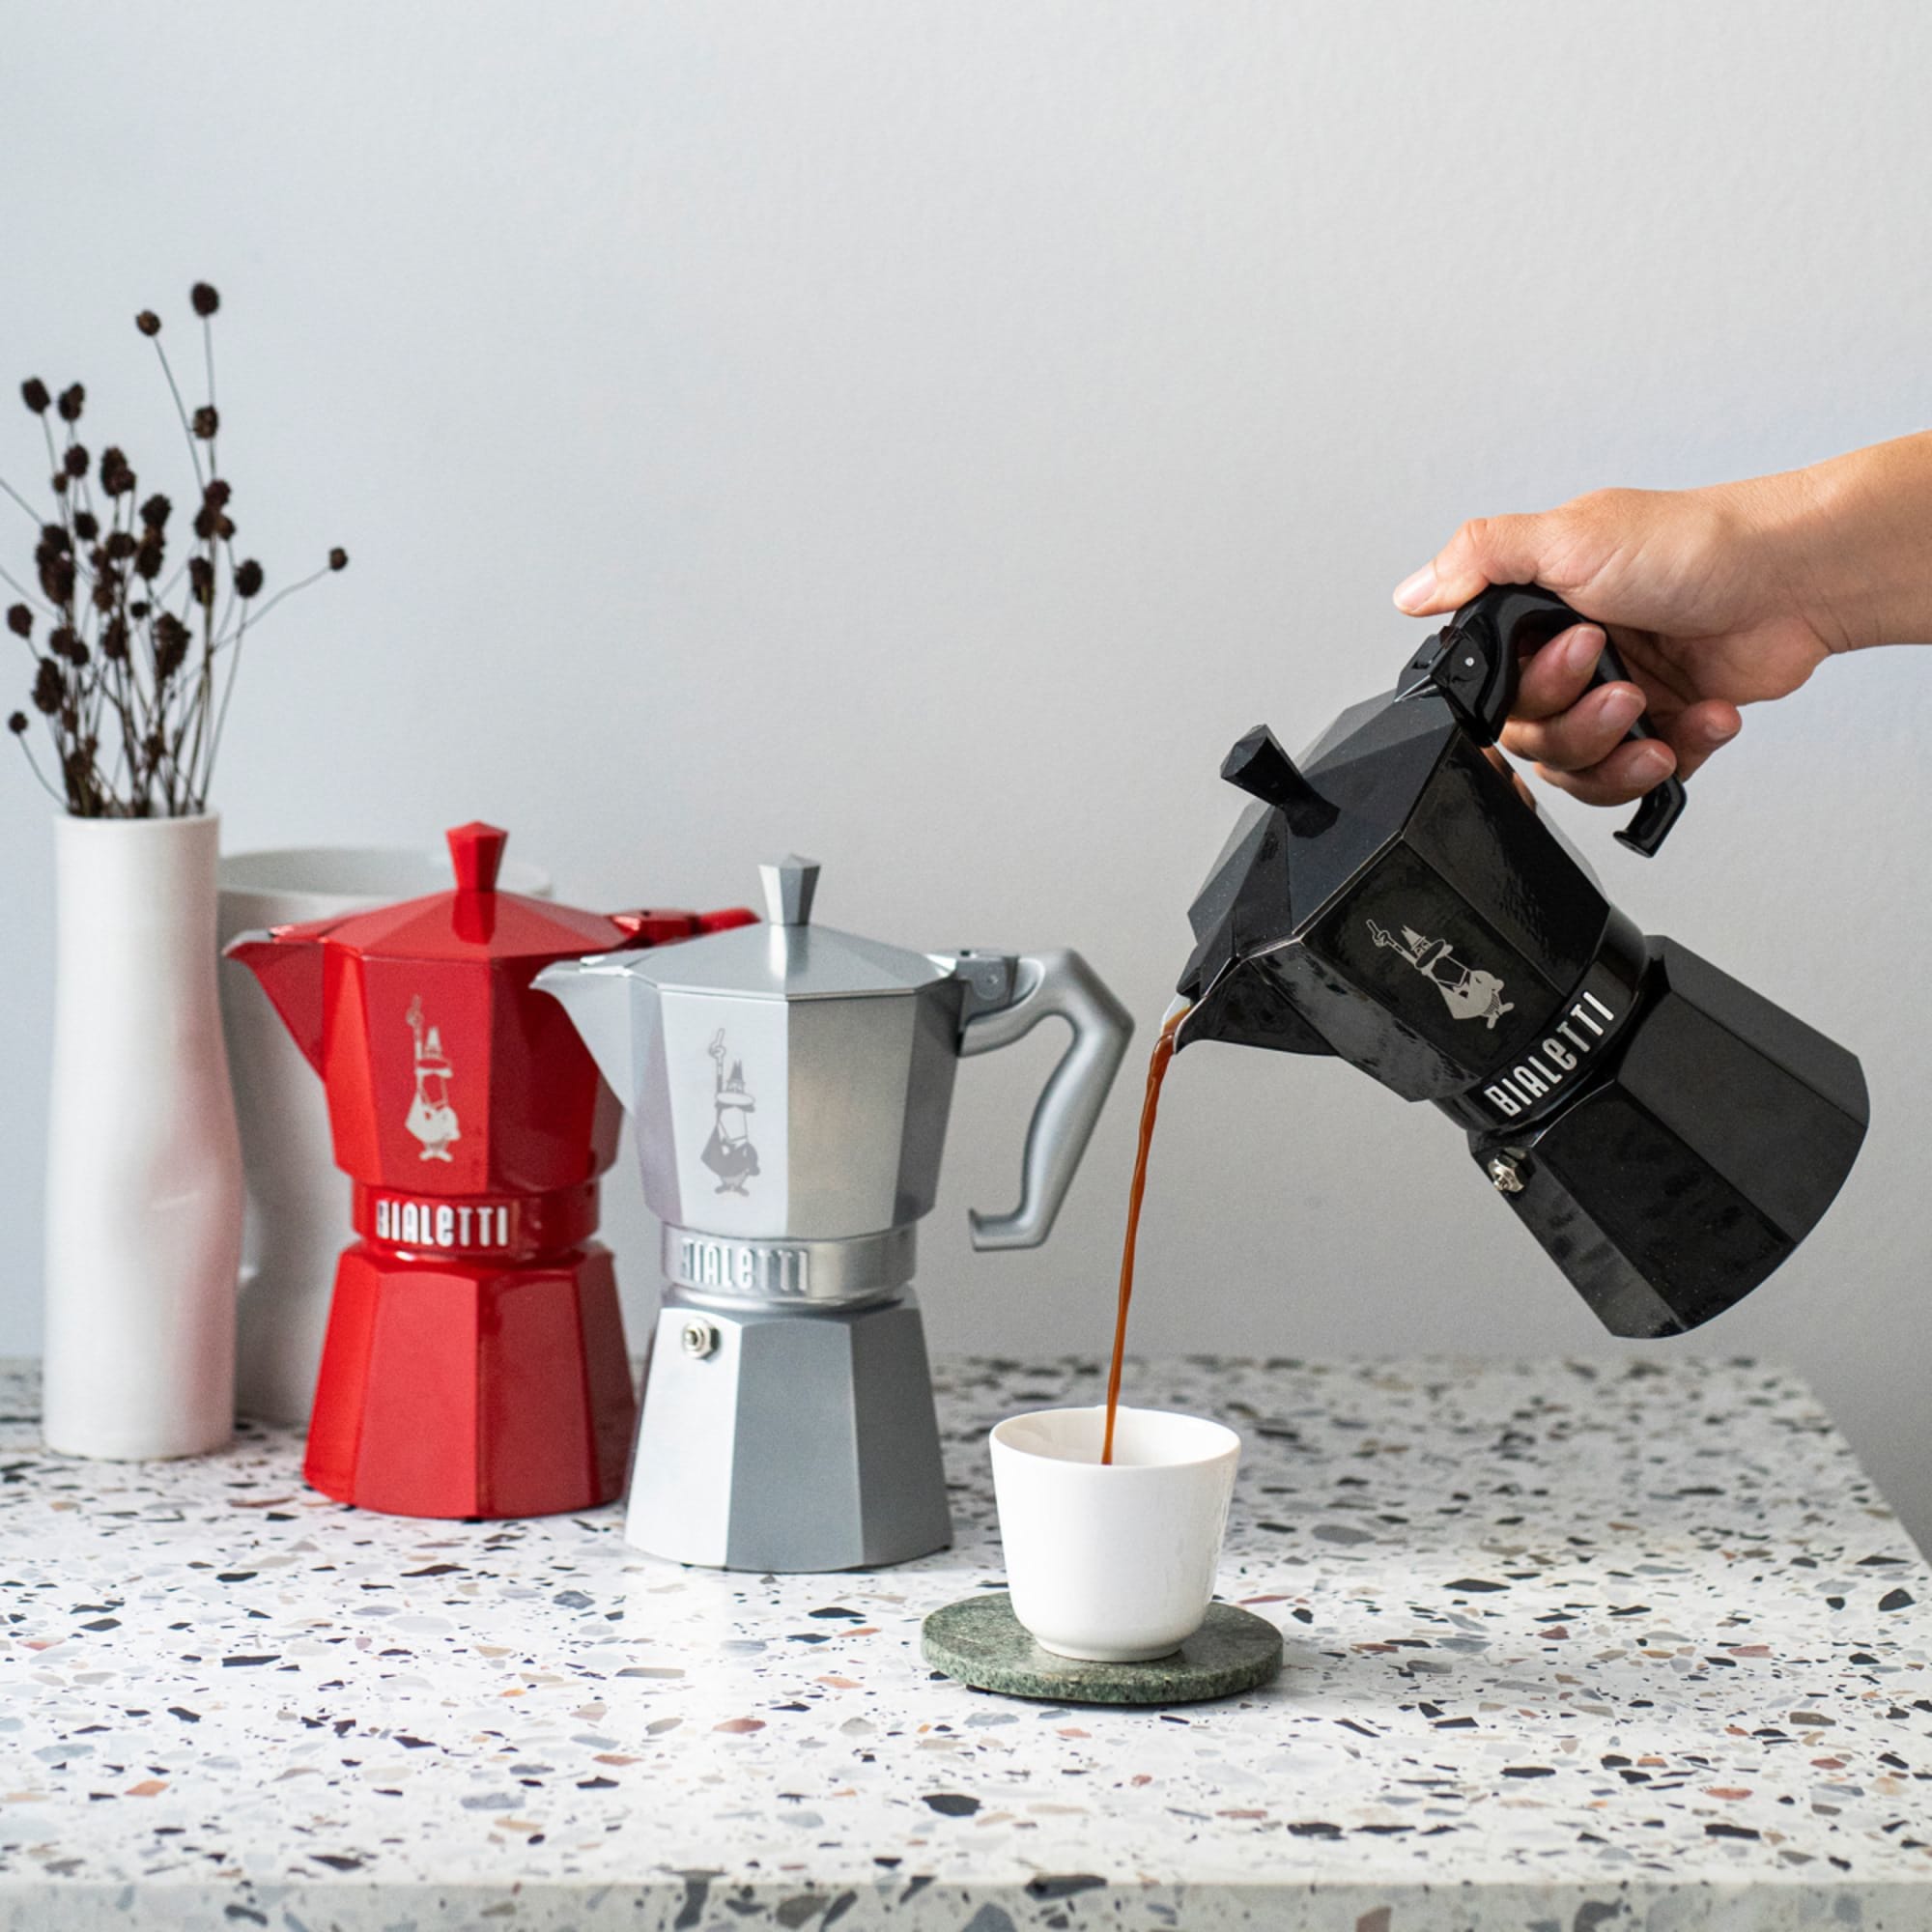 https://res.cloudinary.com/kitchenwarehouse/image/upload/c_fill,g_face,w_1250/f_auto/t_PDP_2000x2000/Supplier%20Images%20/2000px/Bialetti-Moka-Exclusive-Stovetop-Expresso-Maker-6-Cup-Black_2_2000px.jpg?imagetype=pdp_full